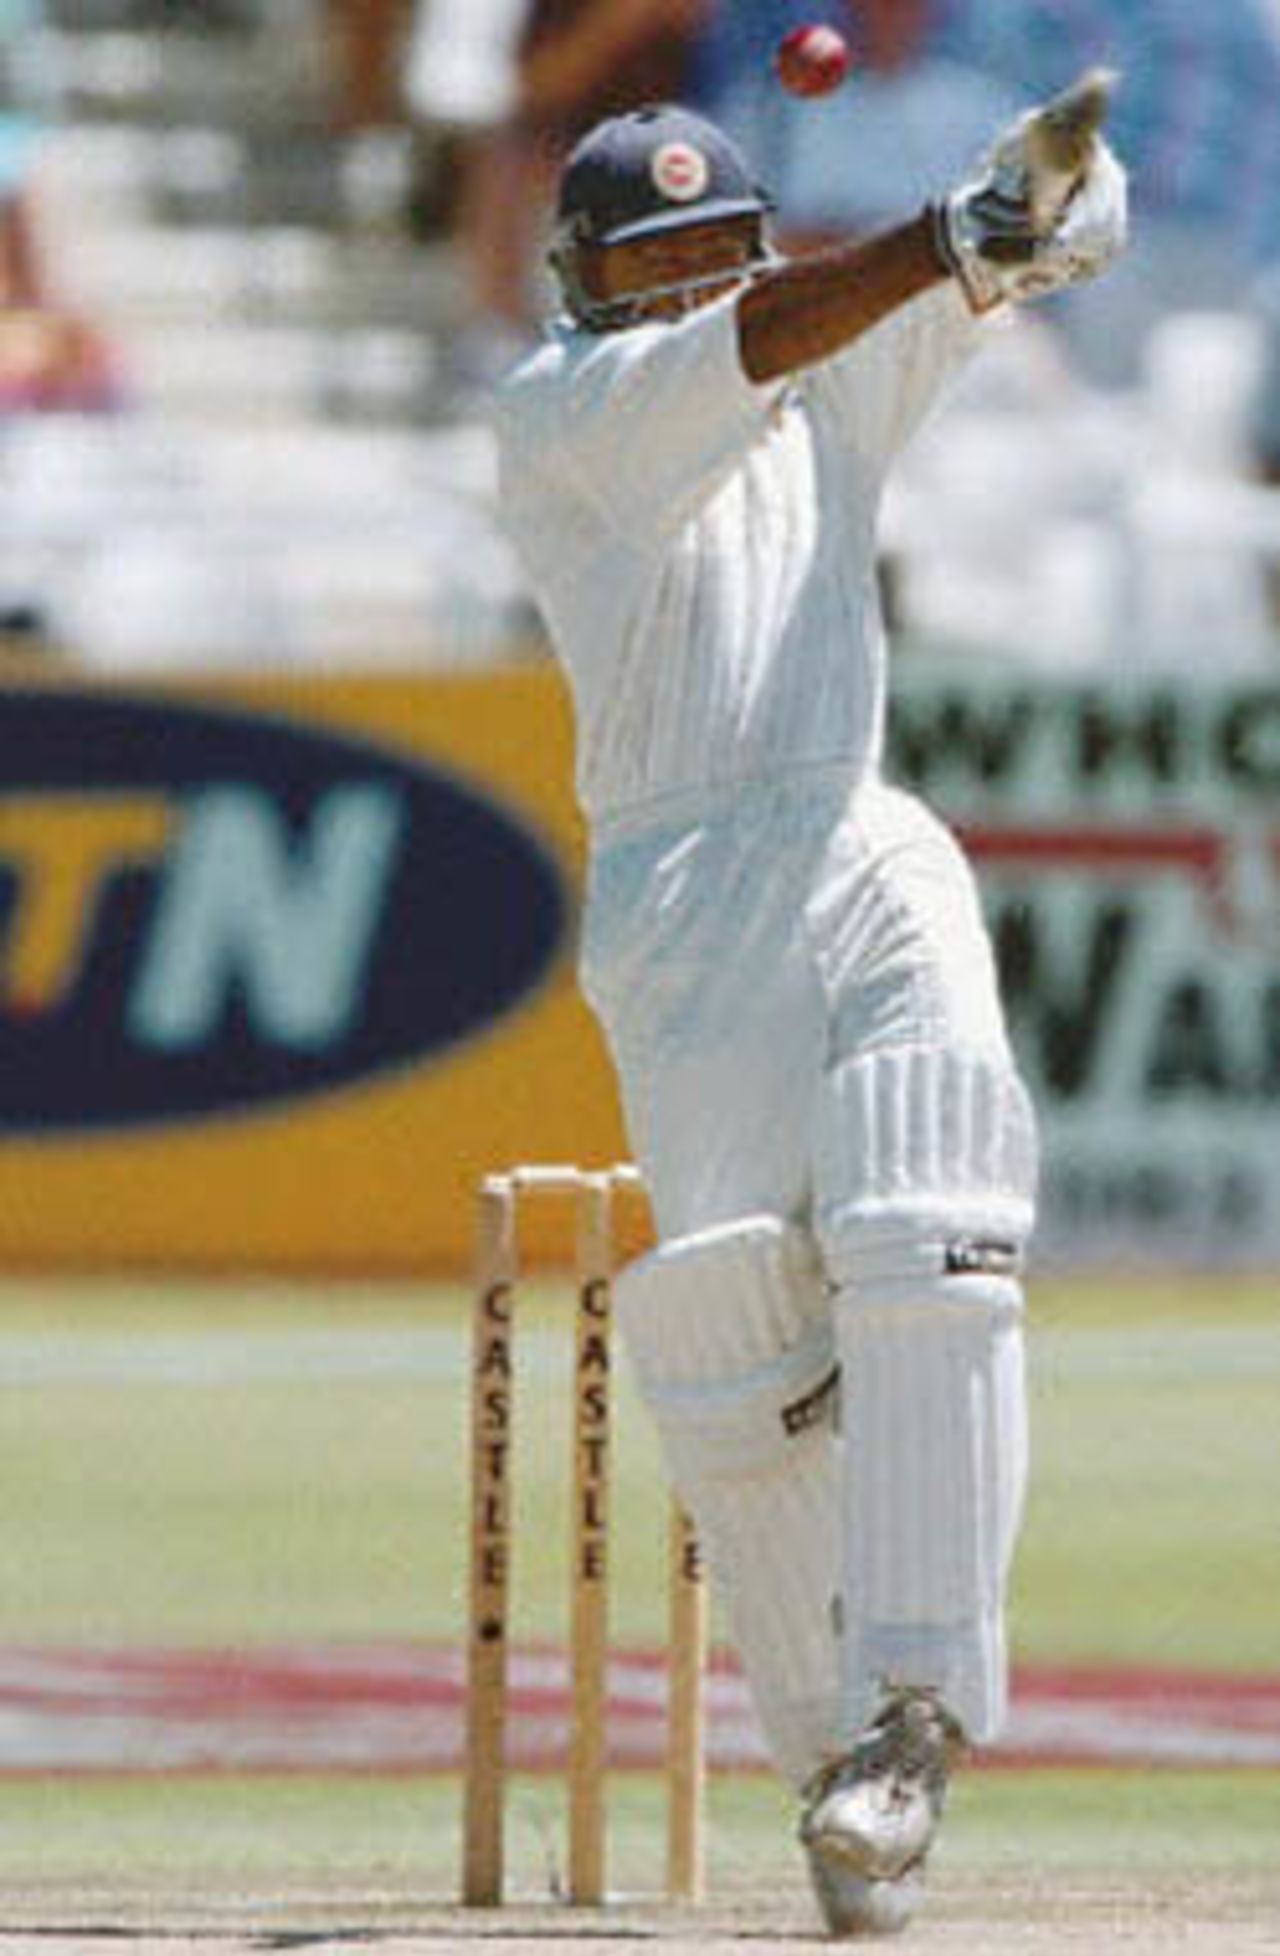 Sri Lanka's batsman Mahela Jayawardne hooks on the 3rd day of the 2nd test between South Africa and Sri Lanka played 04 January 2001, at the Newlands cricket ground in Cape Town. South Africa completed a crushing innings and 229-runs defeat over Sri Lanka.